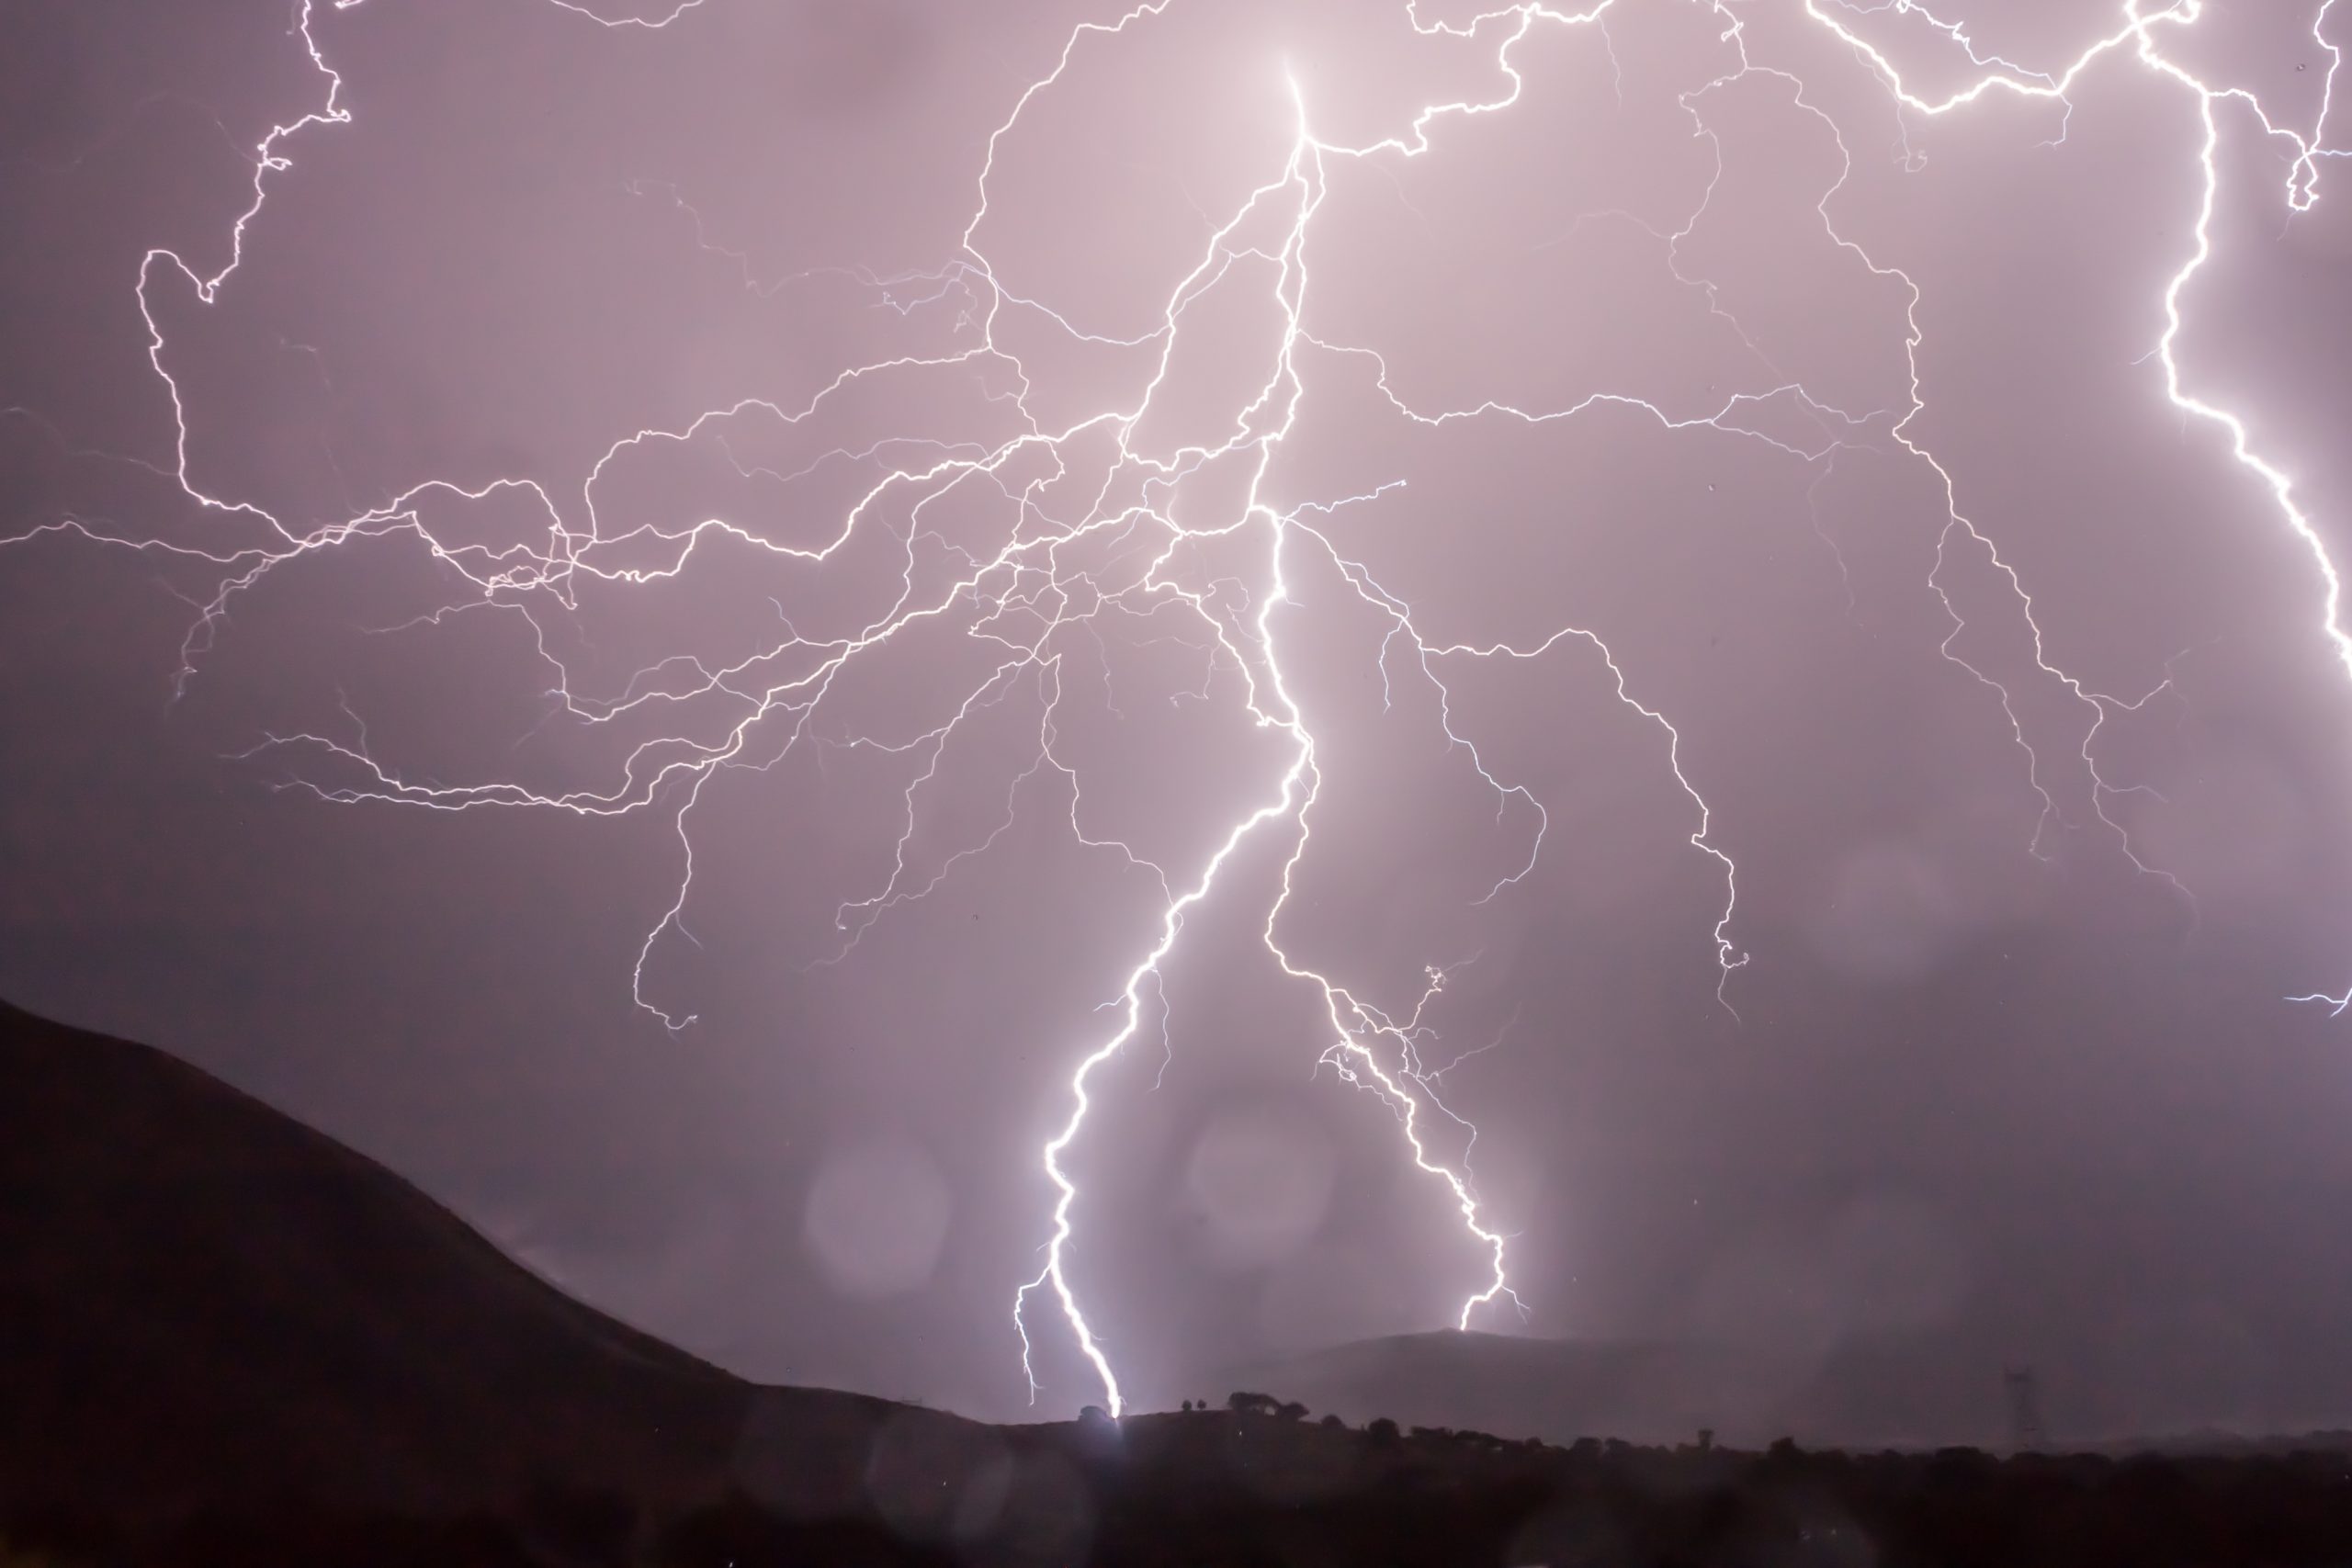 image shows lightning at night behind a landscape of mountains and valleys